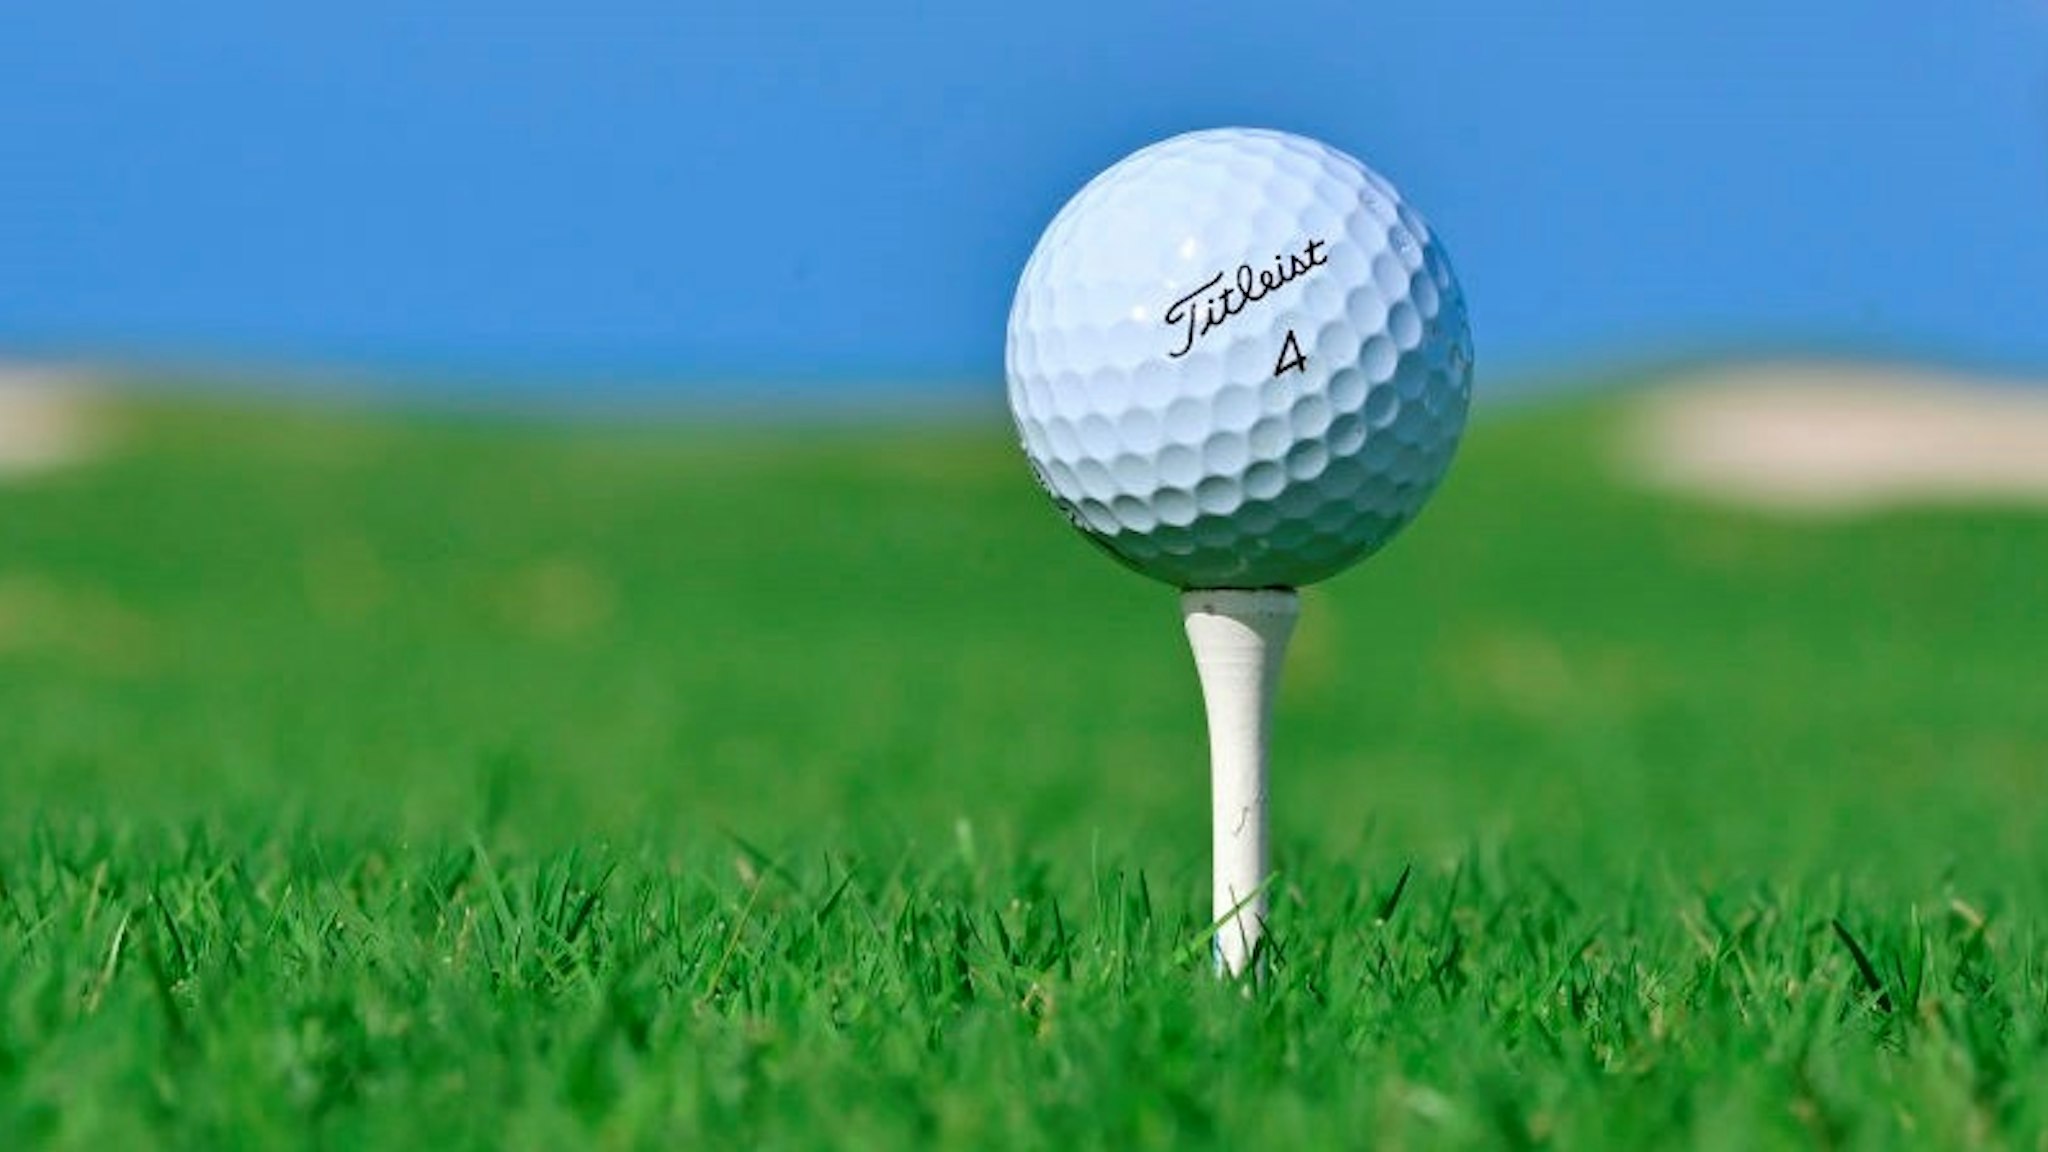 RIO GRANDE, PUERTO RICO - DECEMBER 18: Titleist golf ball on the12th tee at the Coco Beach Championship course on December 18, 2019 in Rio Grande, Puerto Rico. (Photo by